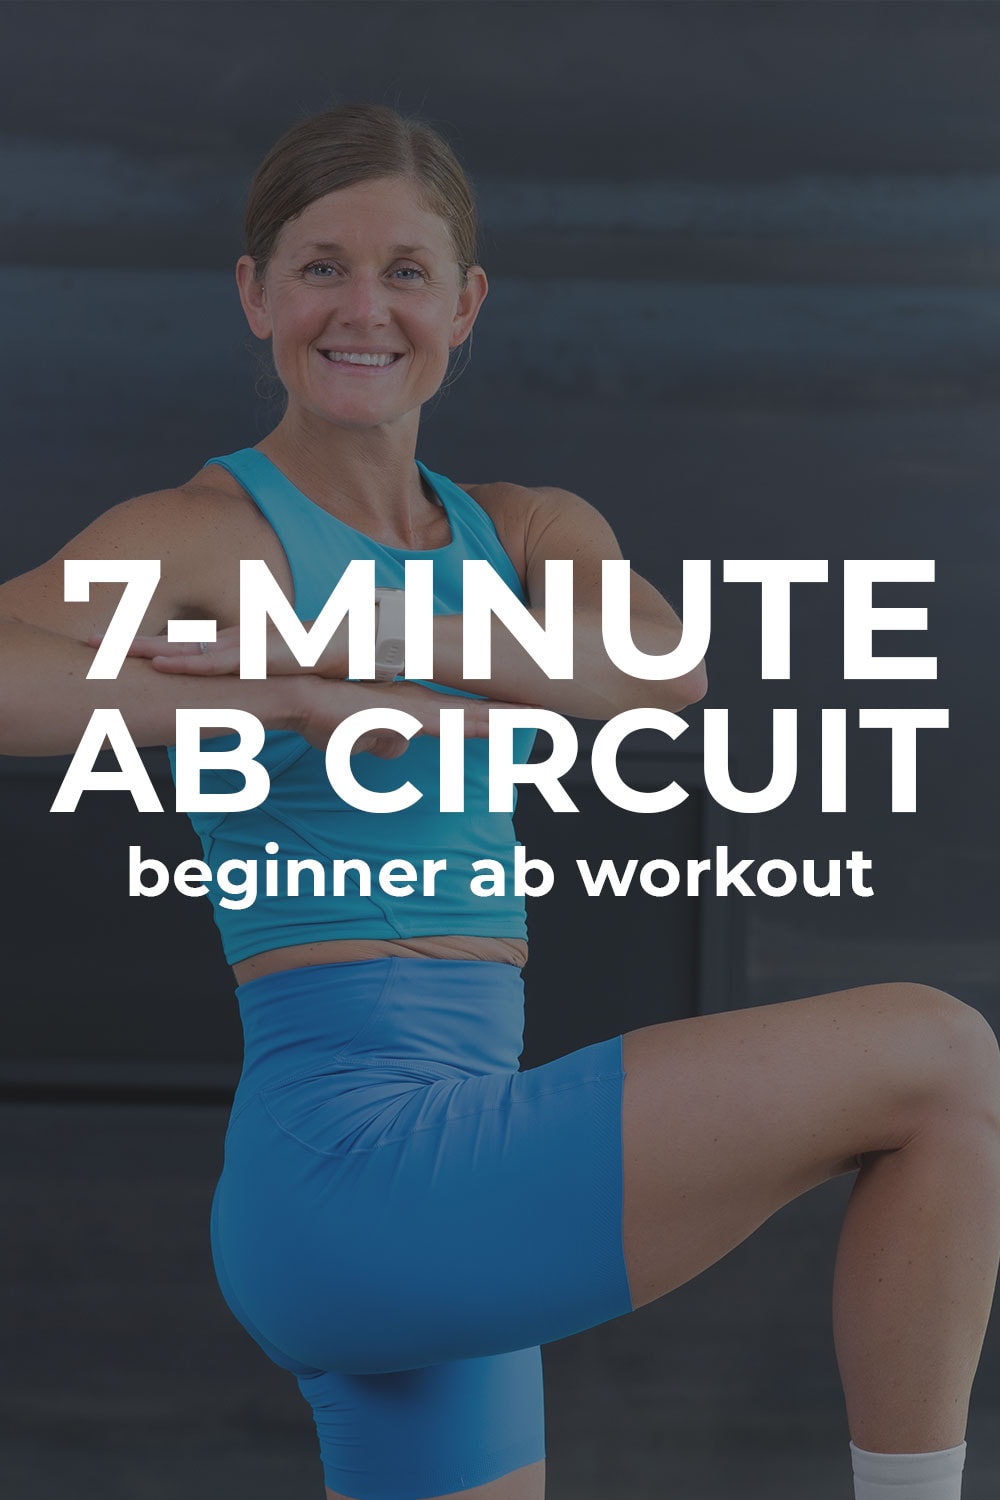 Minute Standing Ab Circuit Workout Video Nourish Move Love